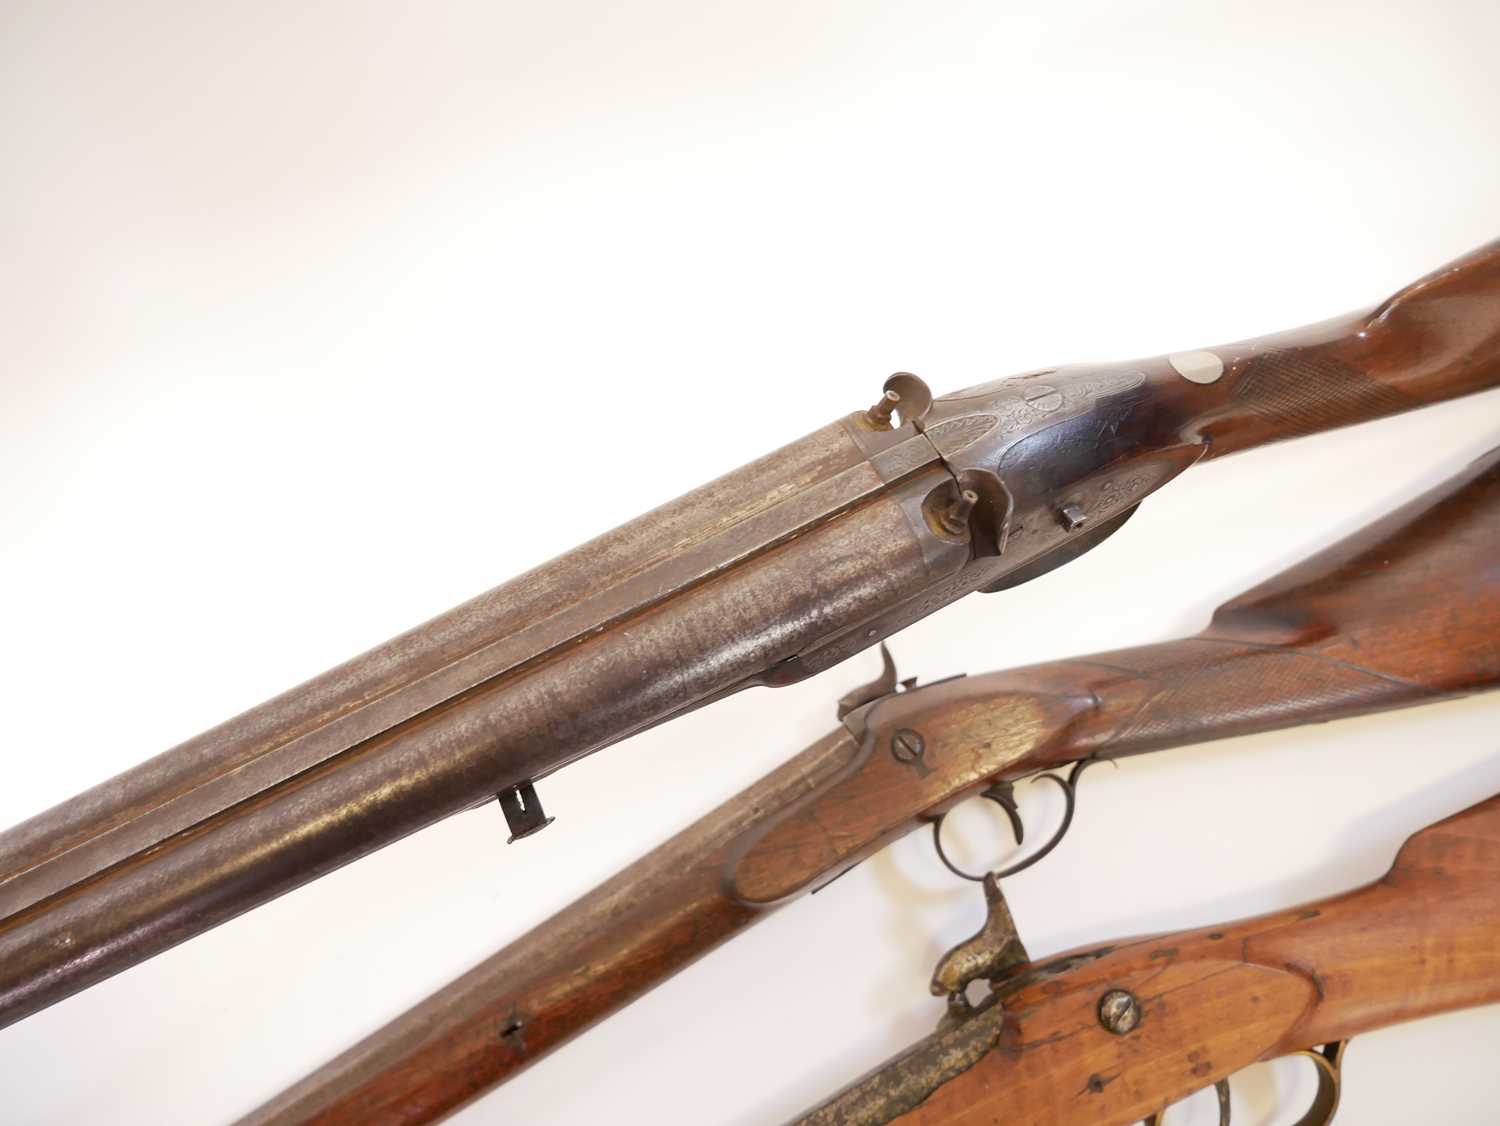 Four percussion shotguns for restoration, one a double barrel, the other three single barrels one by - Image 15 of 21